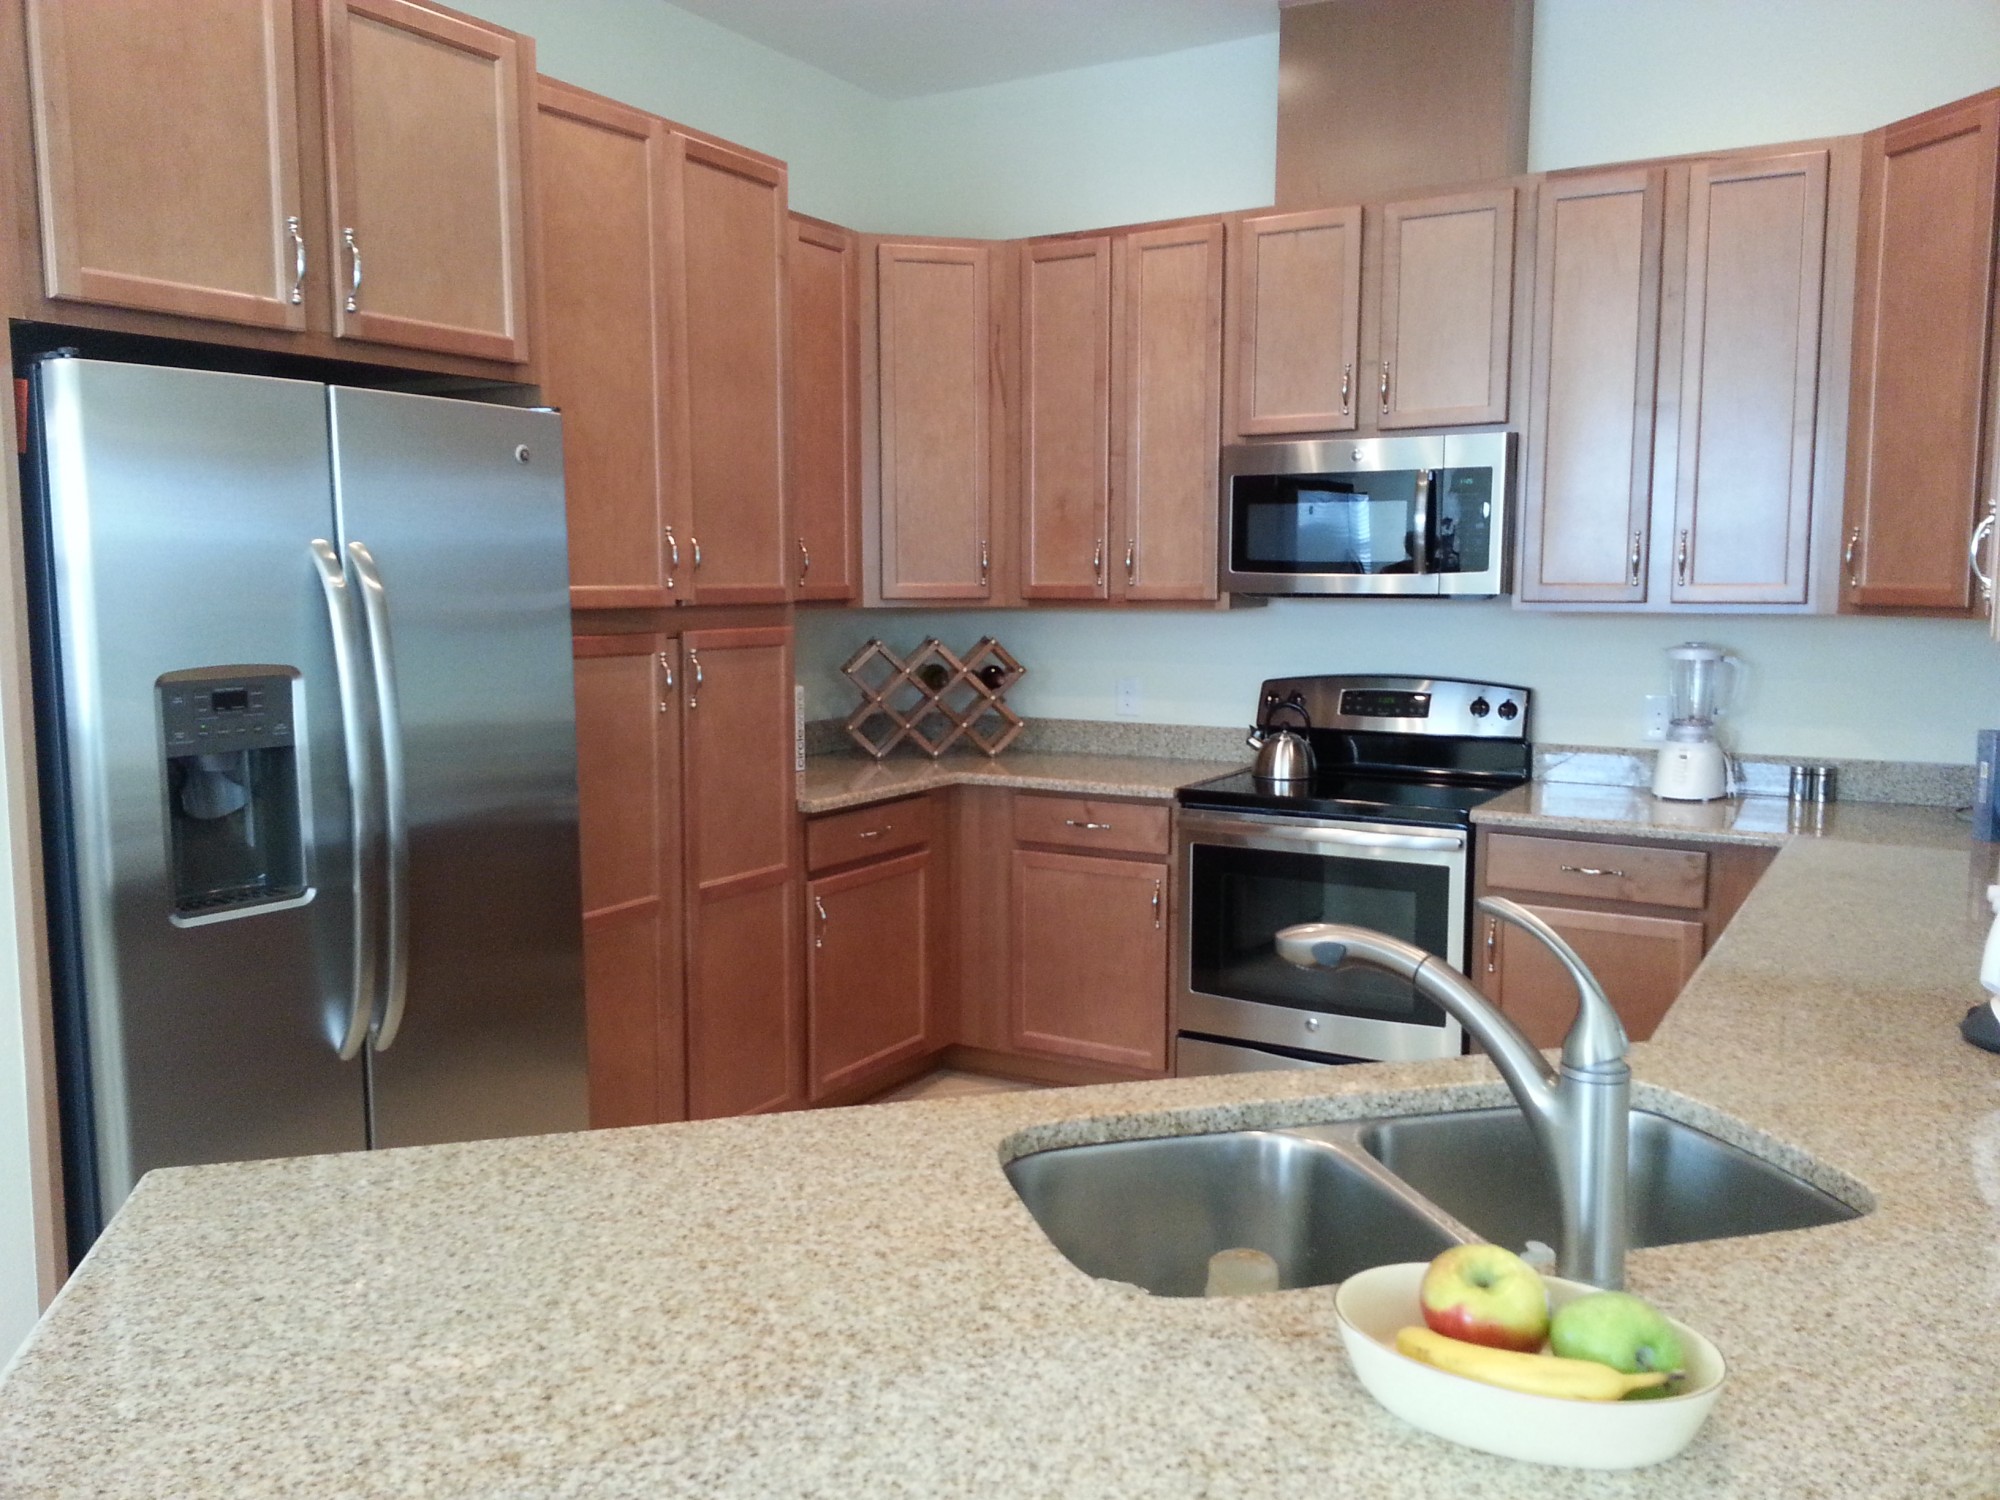 Wood Cabinets, Granite Counters & Stainless Steel Appliances!